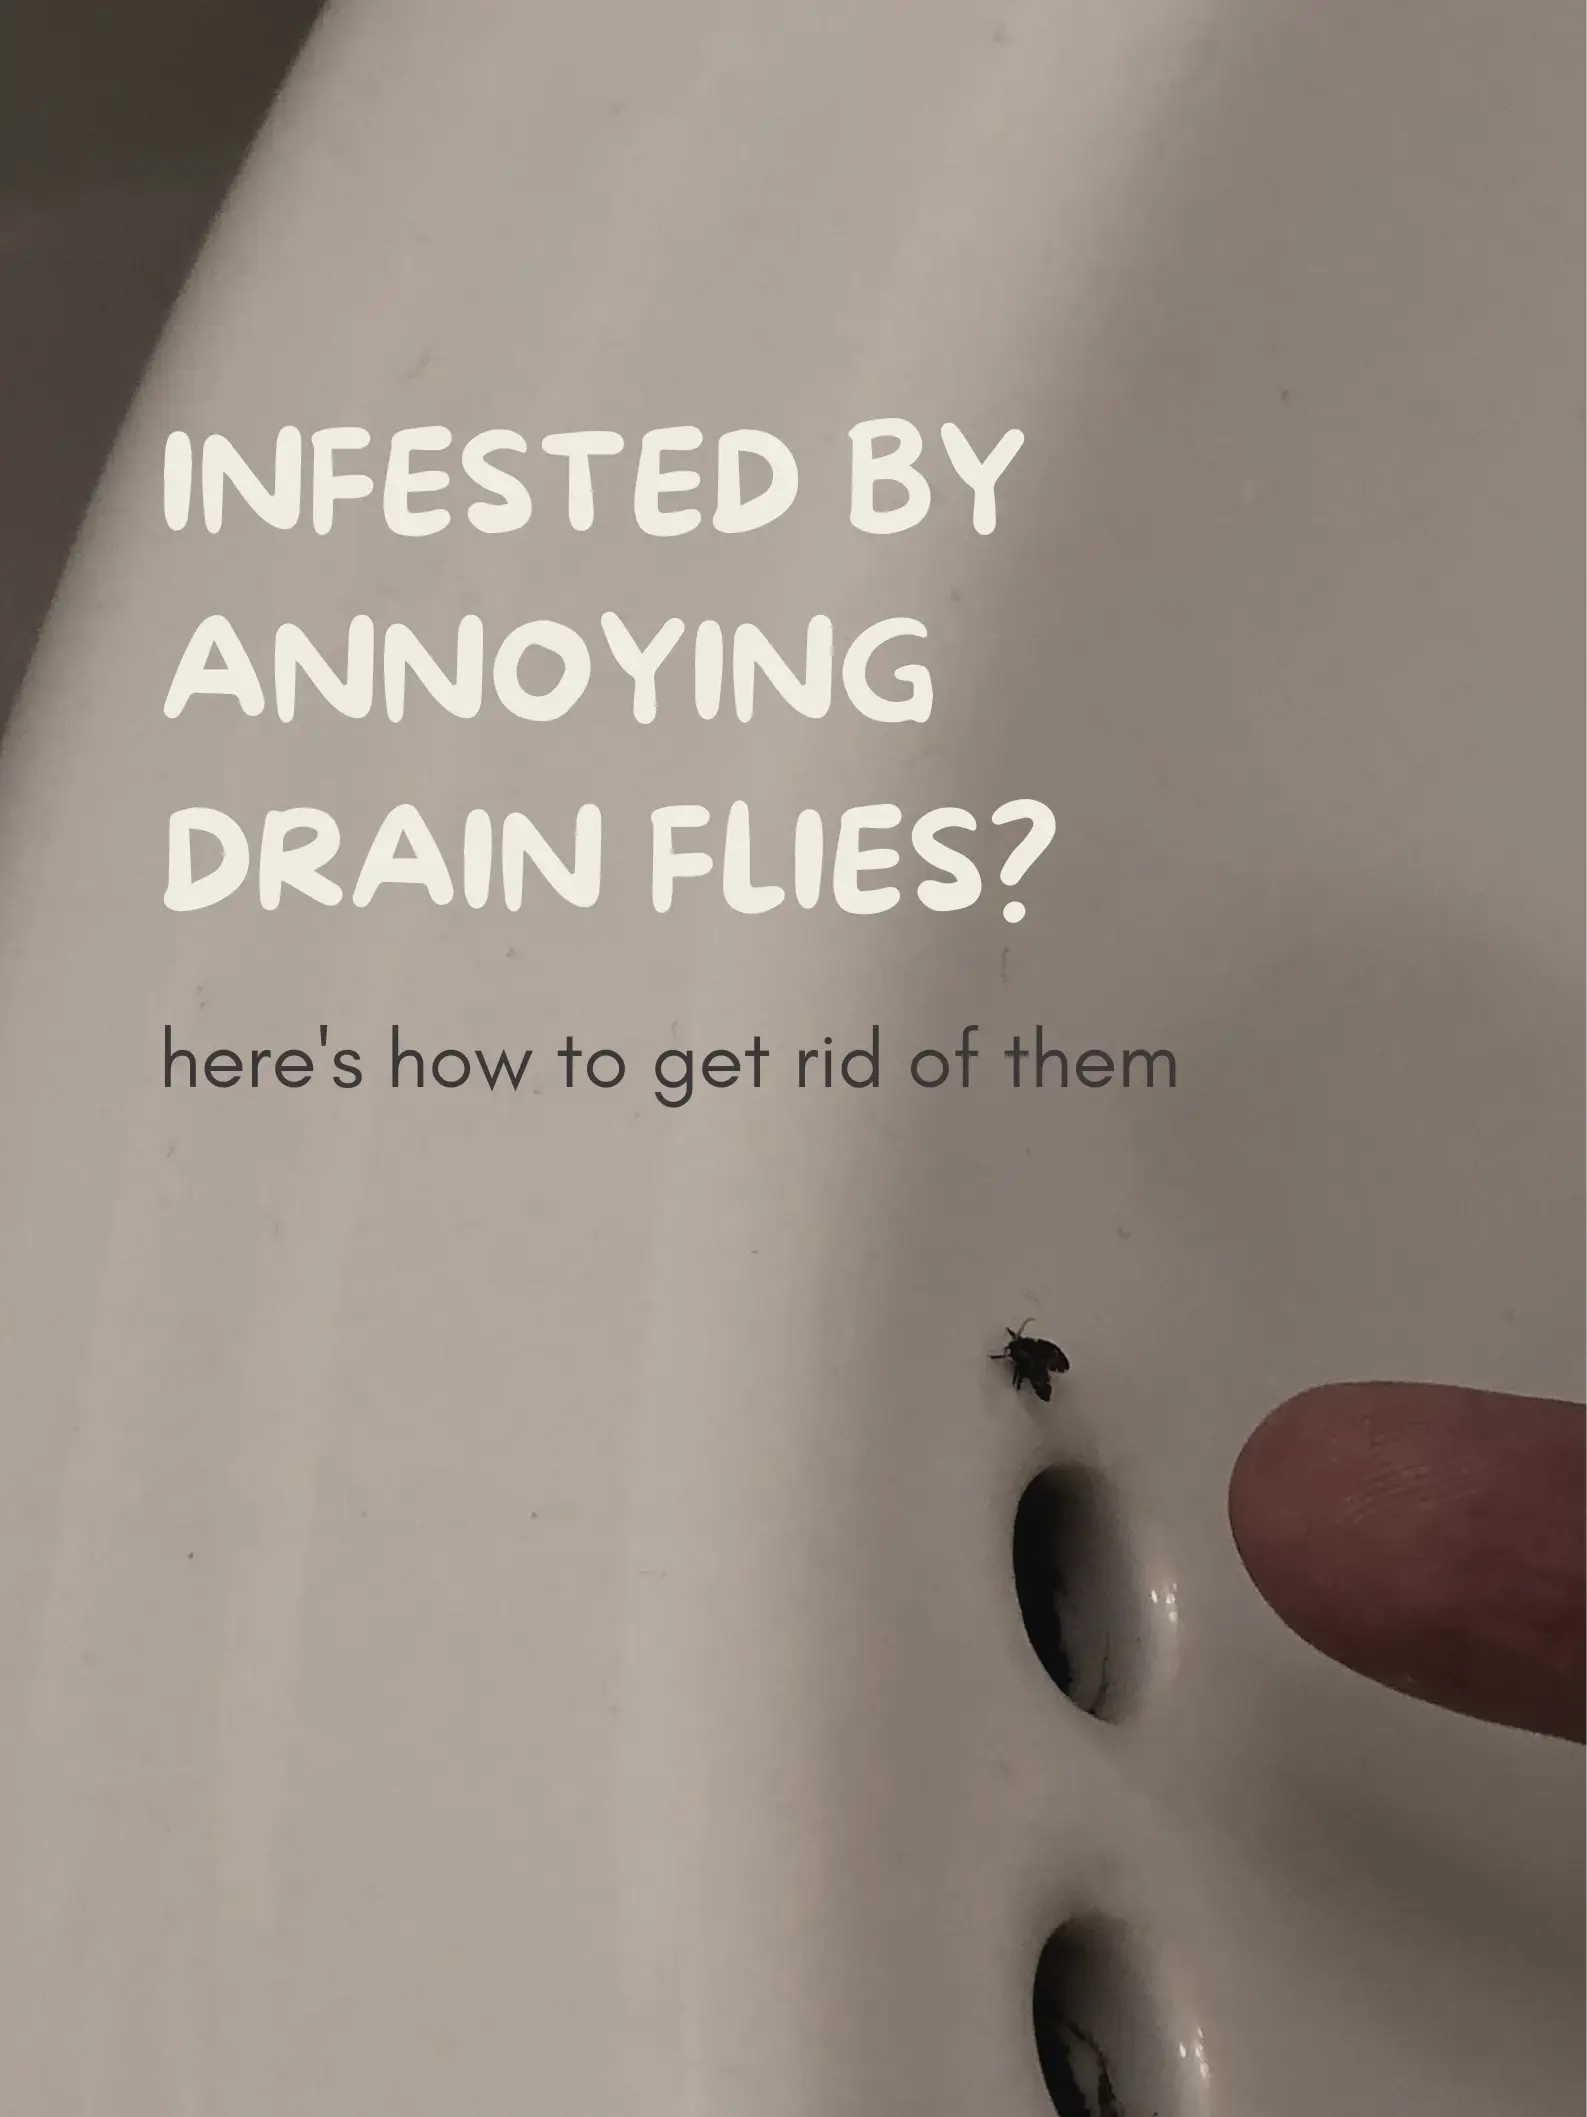 unfiltered thoughts on diy pest control what we really think